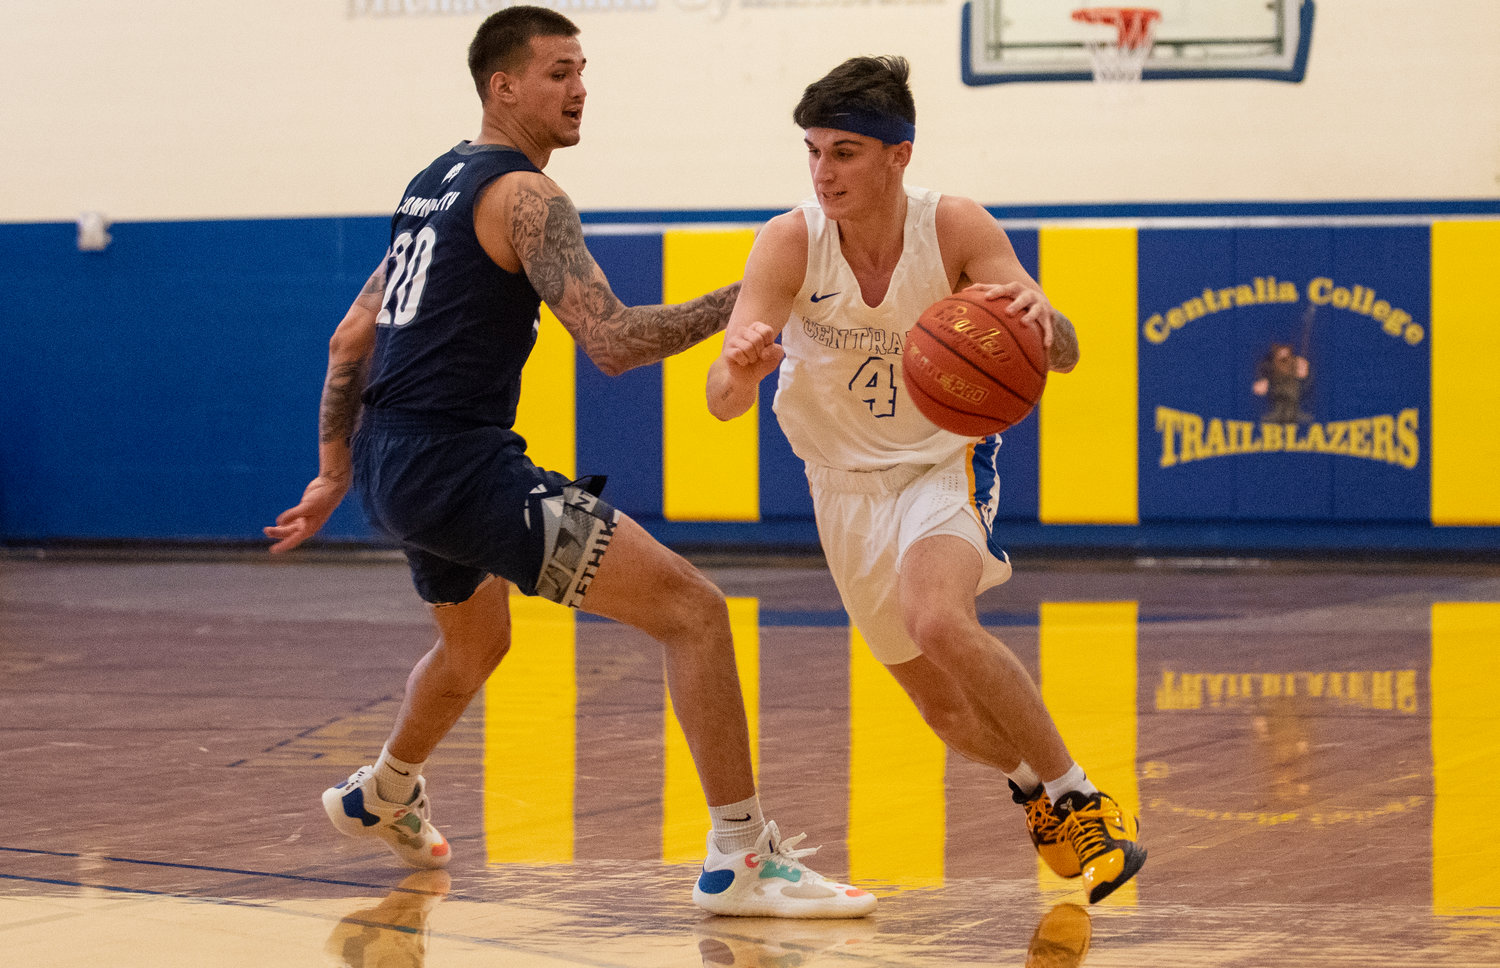 Centralia College guard Kayden Kelly (3) drives against a Tacoma defender.